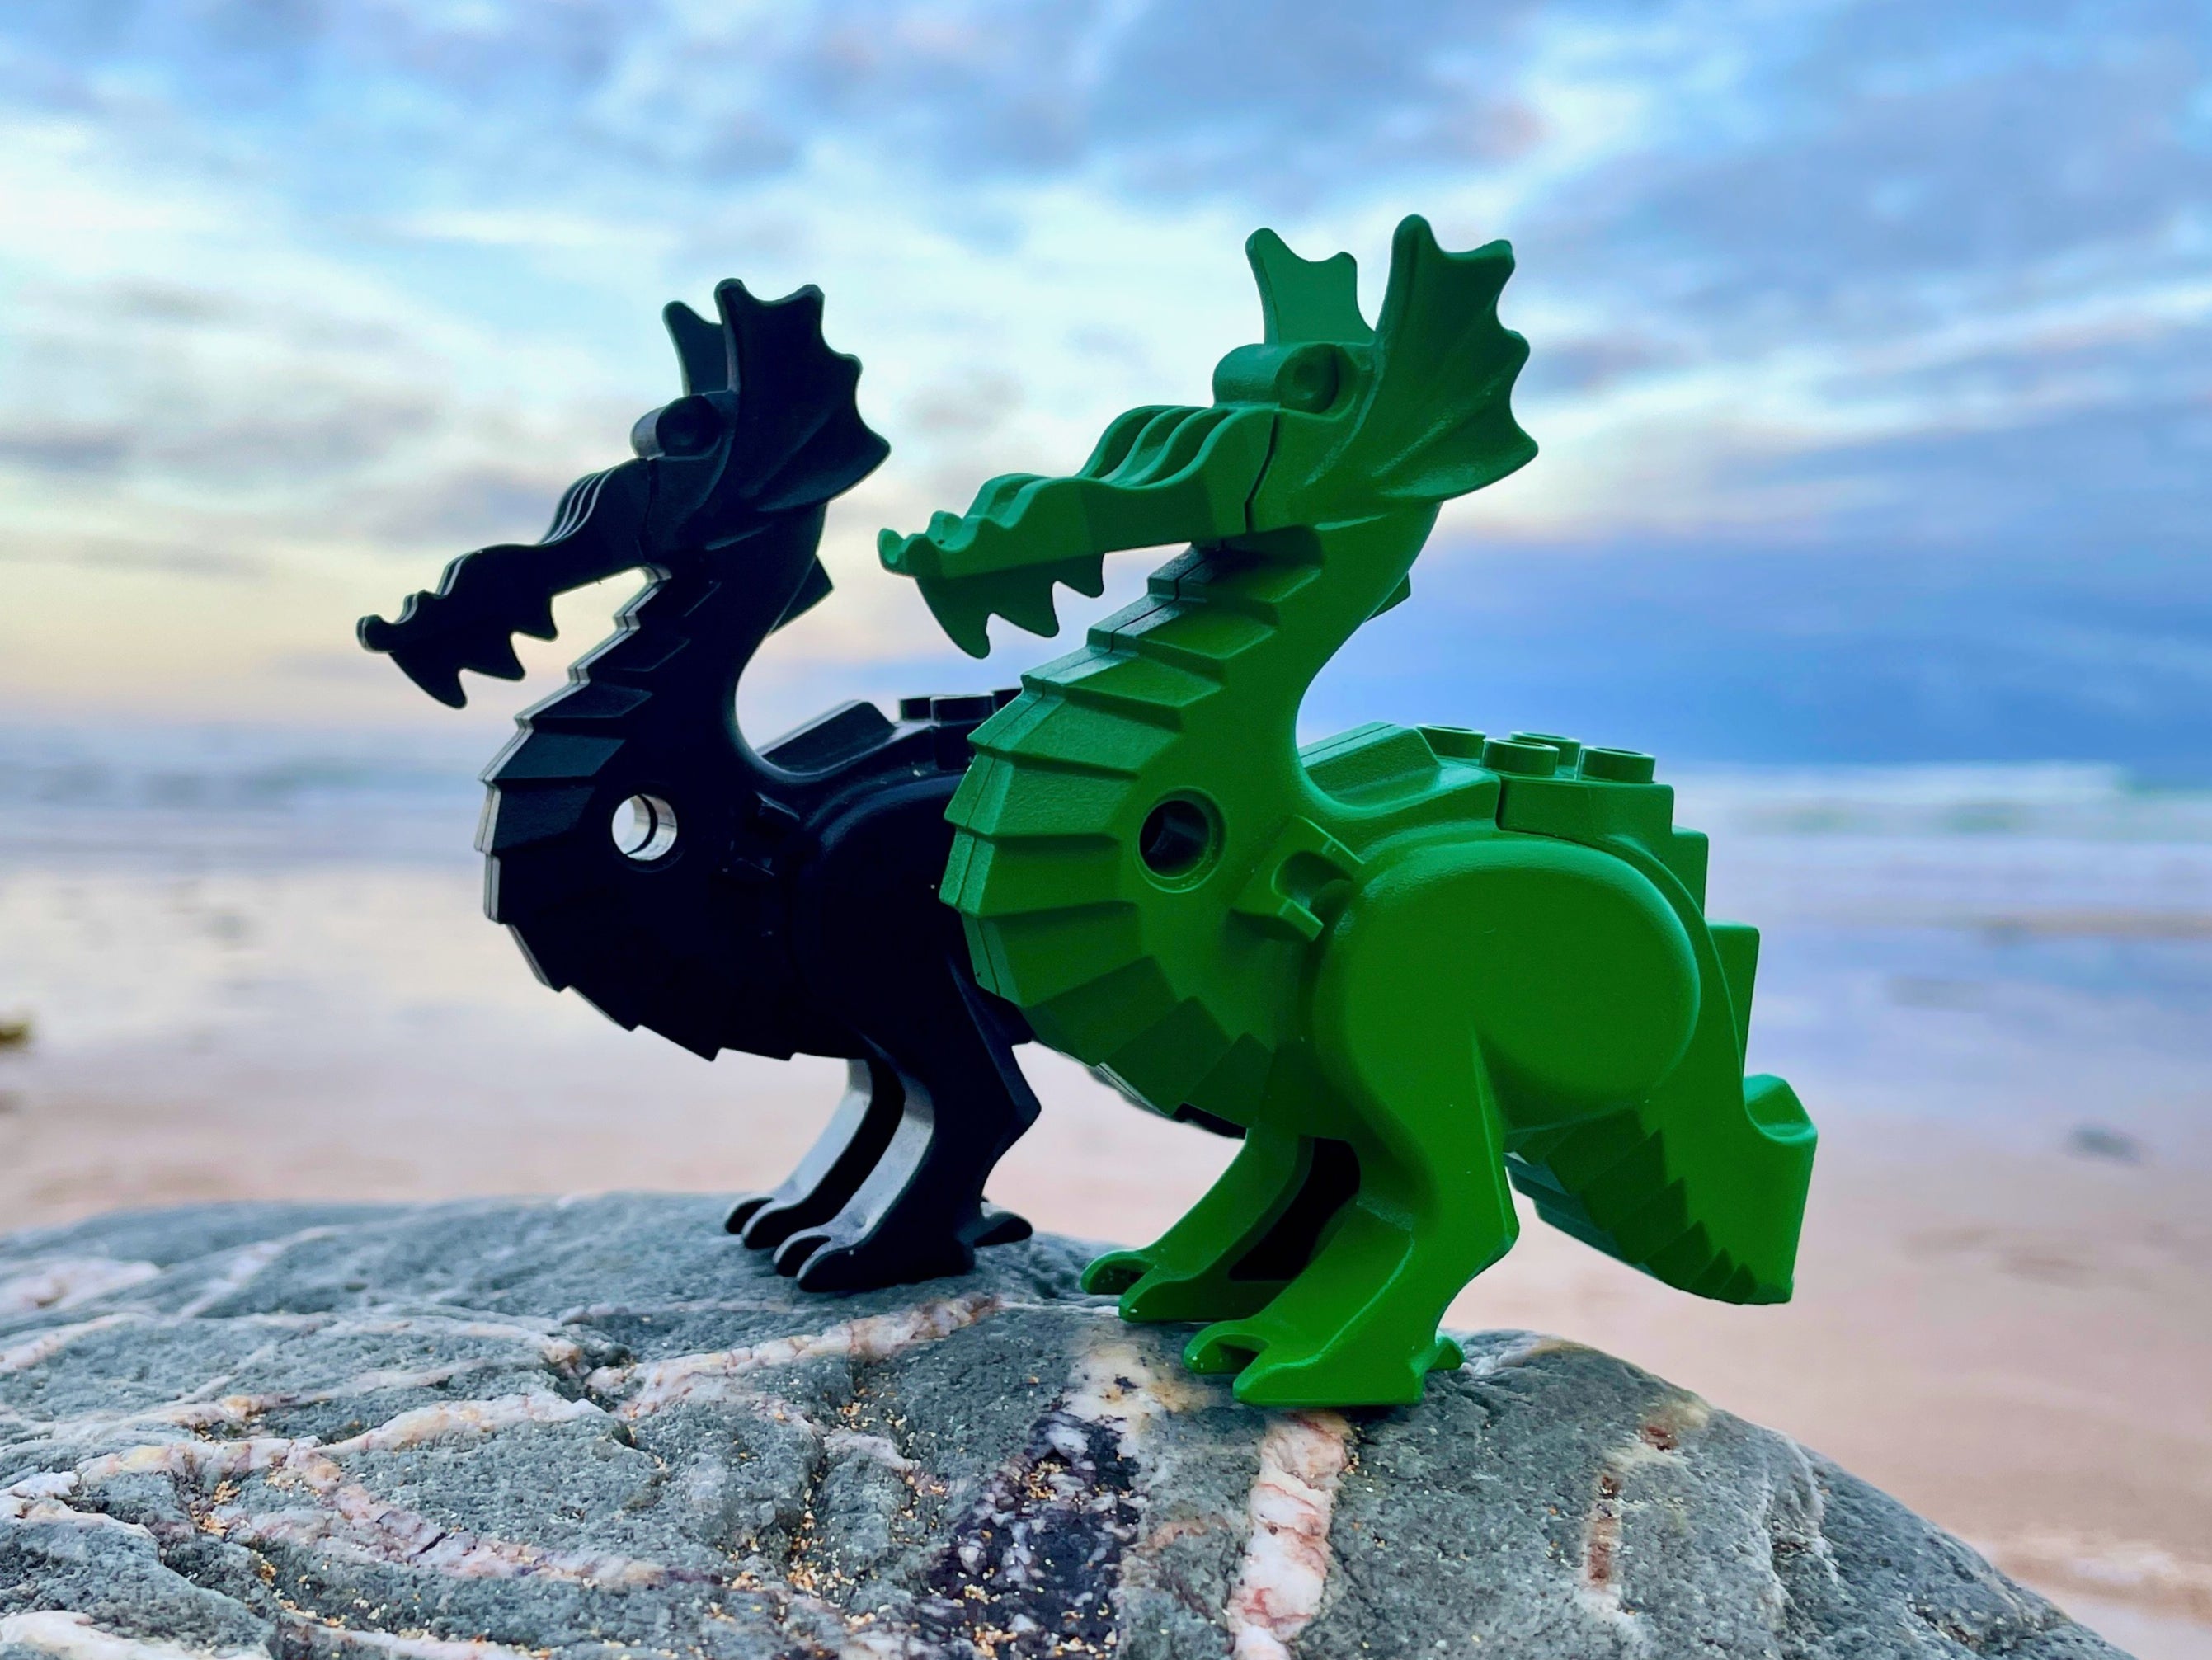 Toymaker Lego will stick to its quest to find sustainable